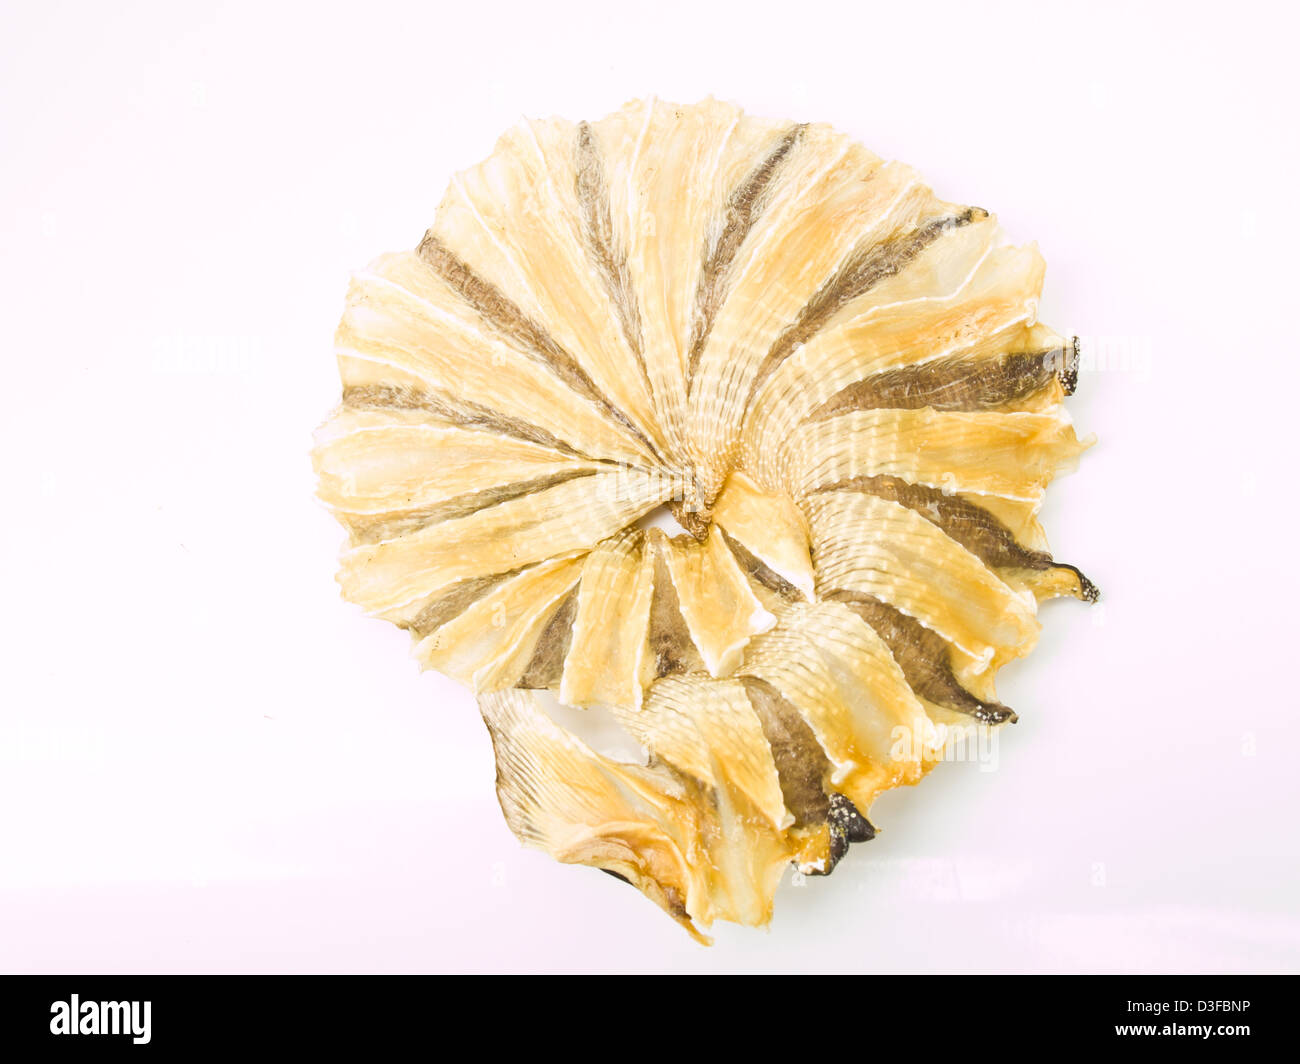 Round dried fishes from Thailand isolated on white background Stock Photo